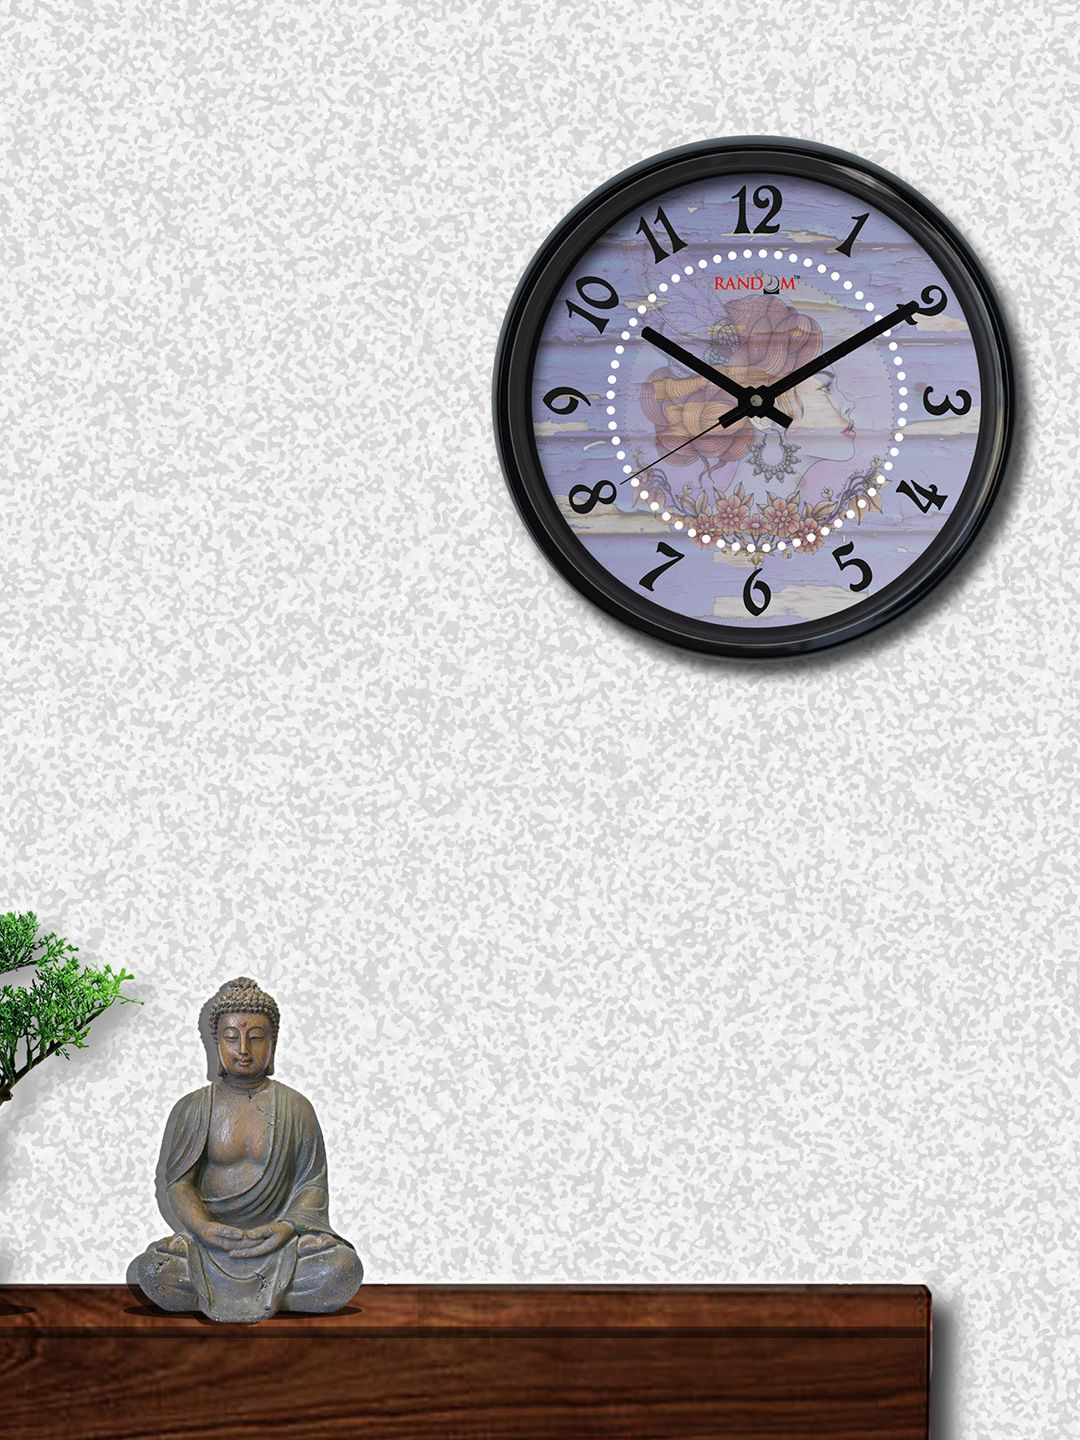 RANDOM Lavender Round Printed 30.48 cm Analogue Wall Clock Price in India